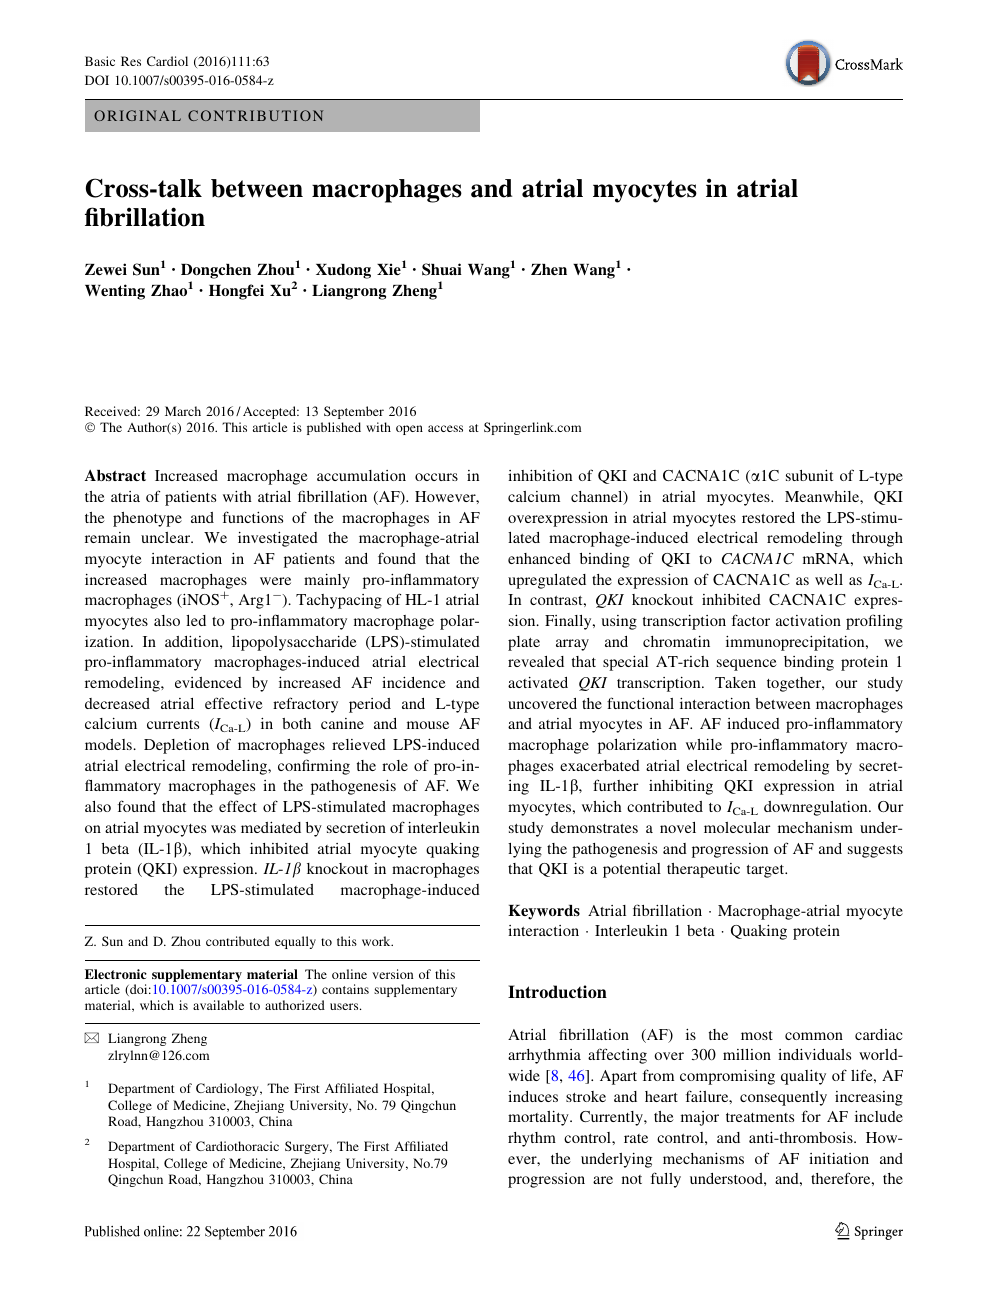 Cross Talk Between Macrophages And Atrial Myocytes In Atrial Fibrillation Topic Of Research Paper In Basic Medicine Download Scholarly Article Pdf And Read For Free On Cyberleninka Open Science Hub